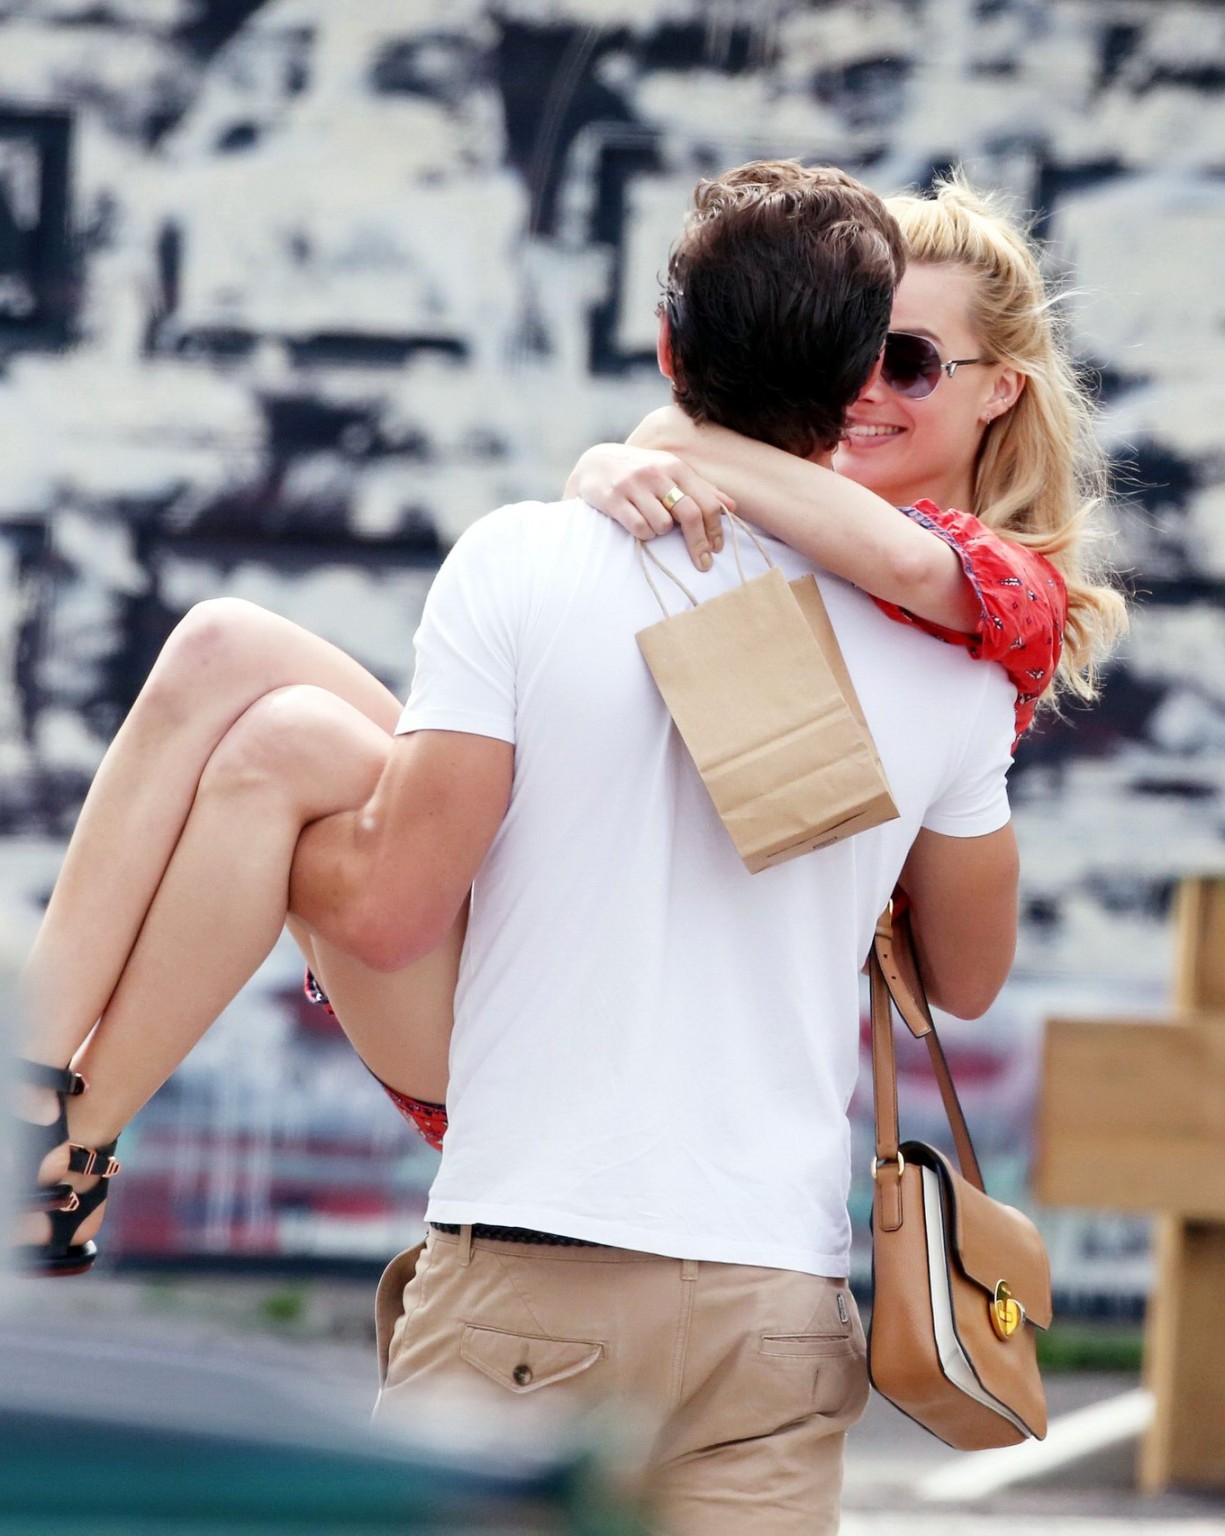 Margot Robbie cleavy licking an ice cream &amp;amp; getting ass groped #75161118